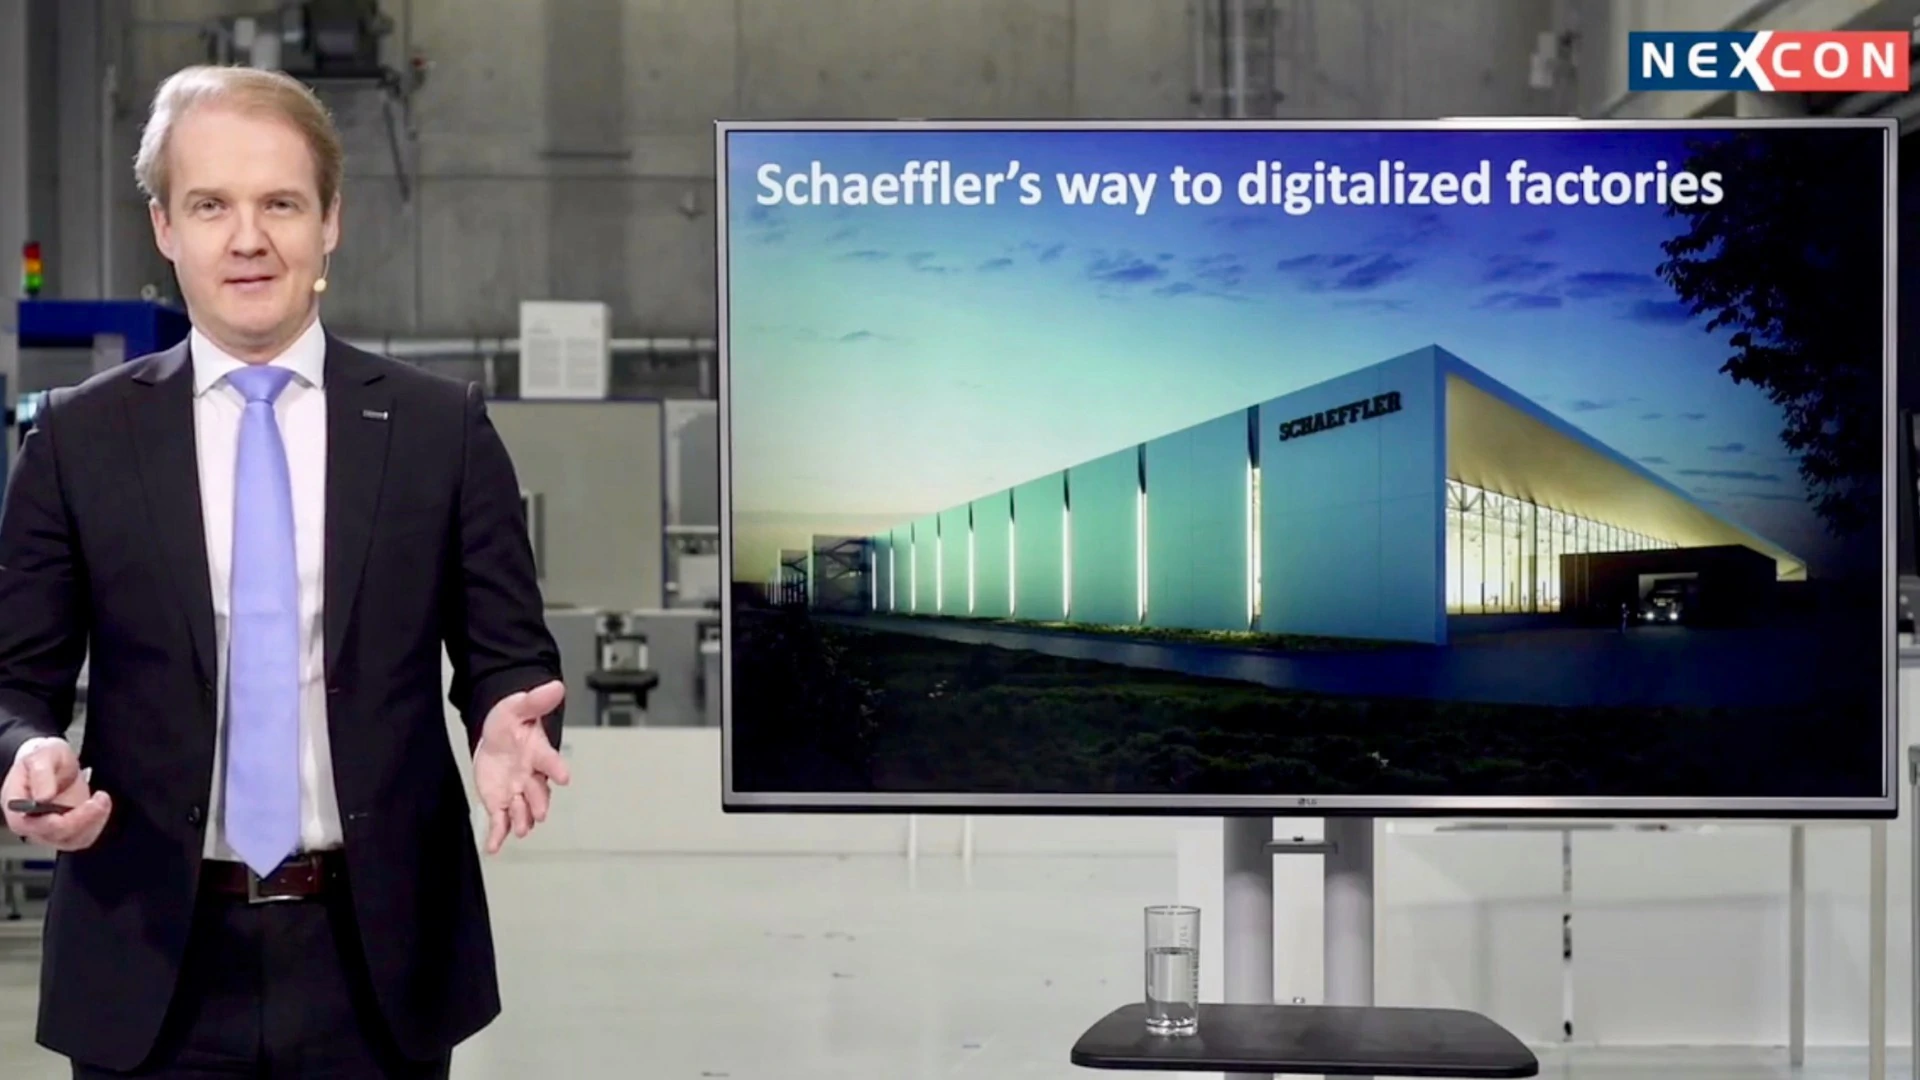 Industry leaders like Andreas Schick, COO of Schaeffler, provide insights in how they shape the Digital Transformation of their company.